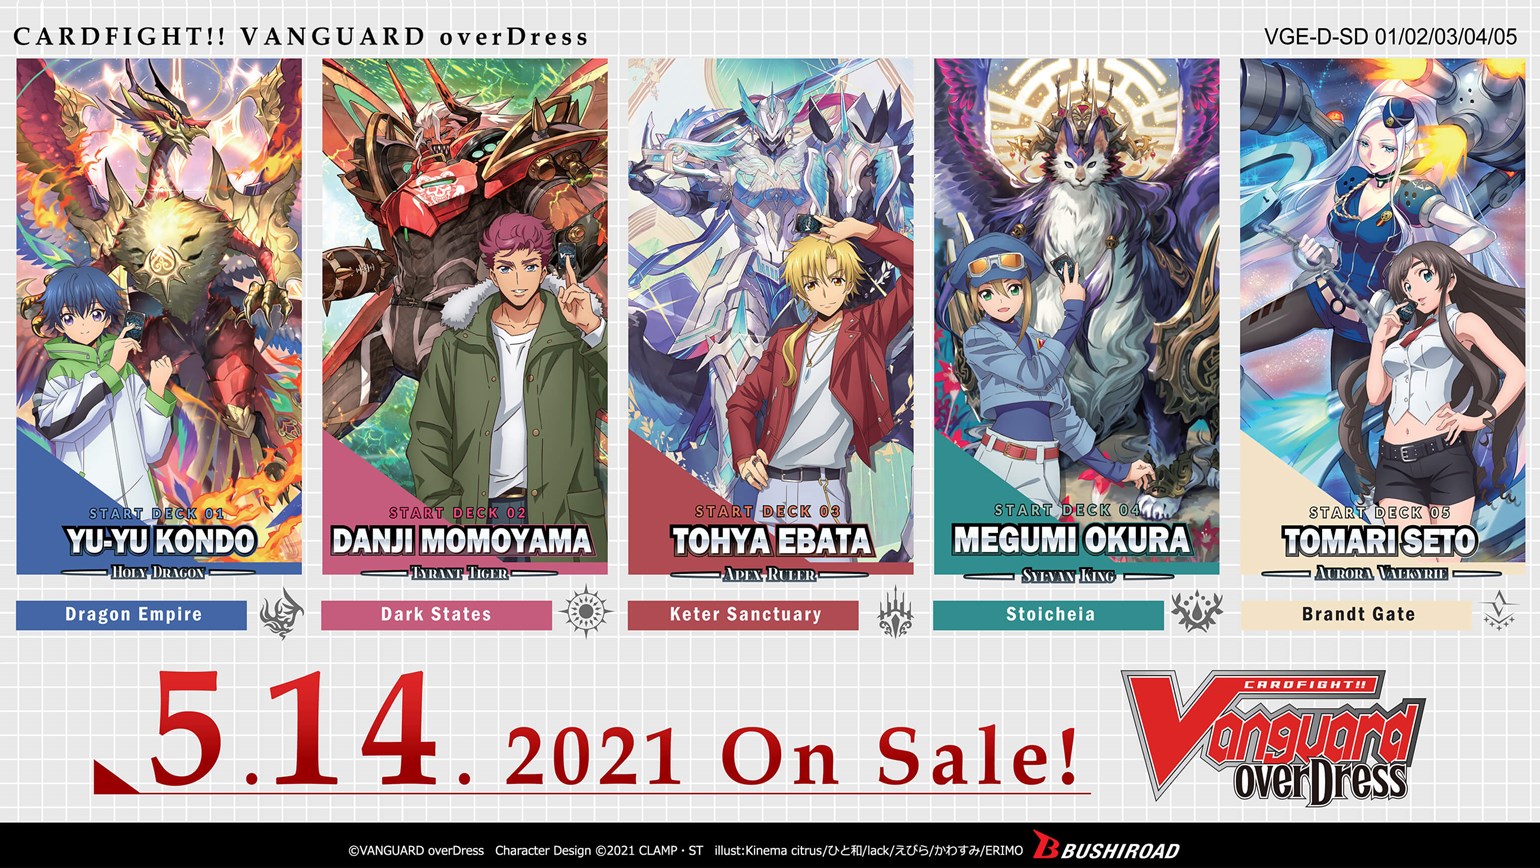 New English Edition CARDFIGHT!! VANGUARD overDress Start Decks are Coming to Stores on May 14th!